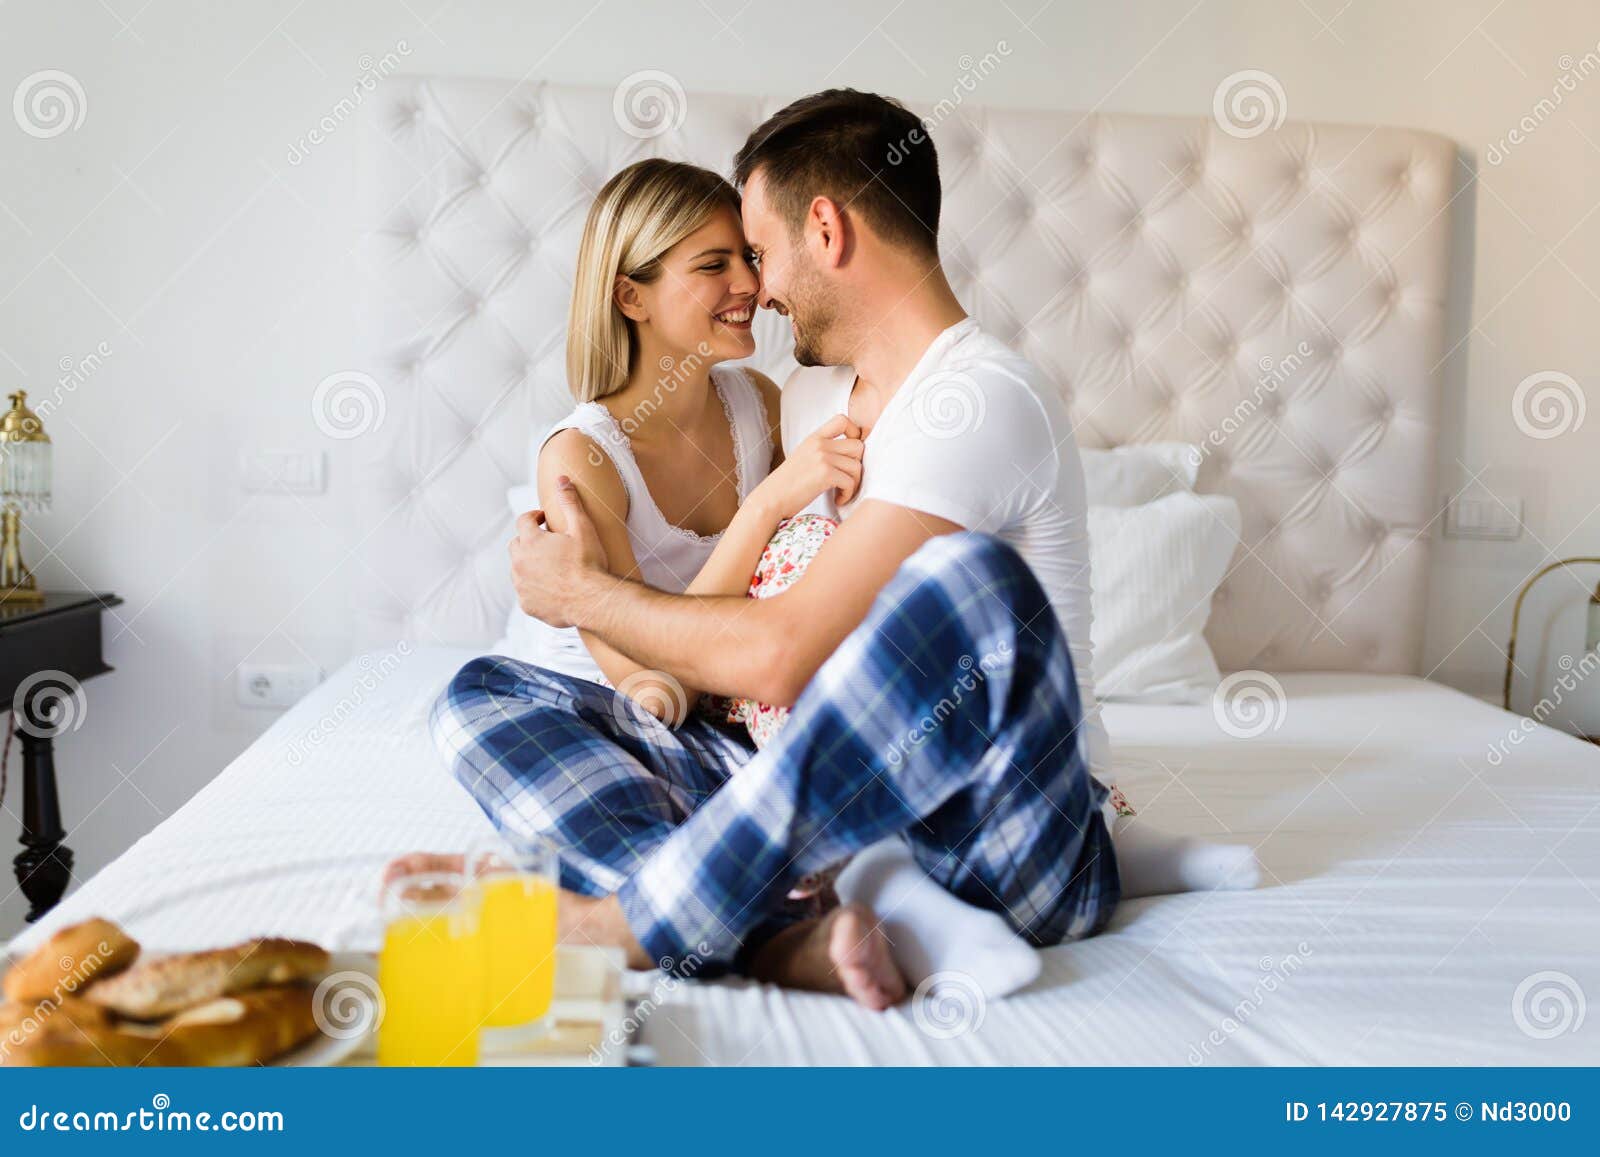 Young Couple Having Having Romantic Times In Bedroom Stock Image